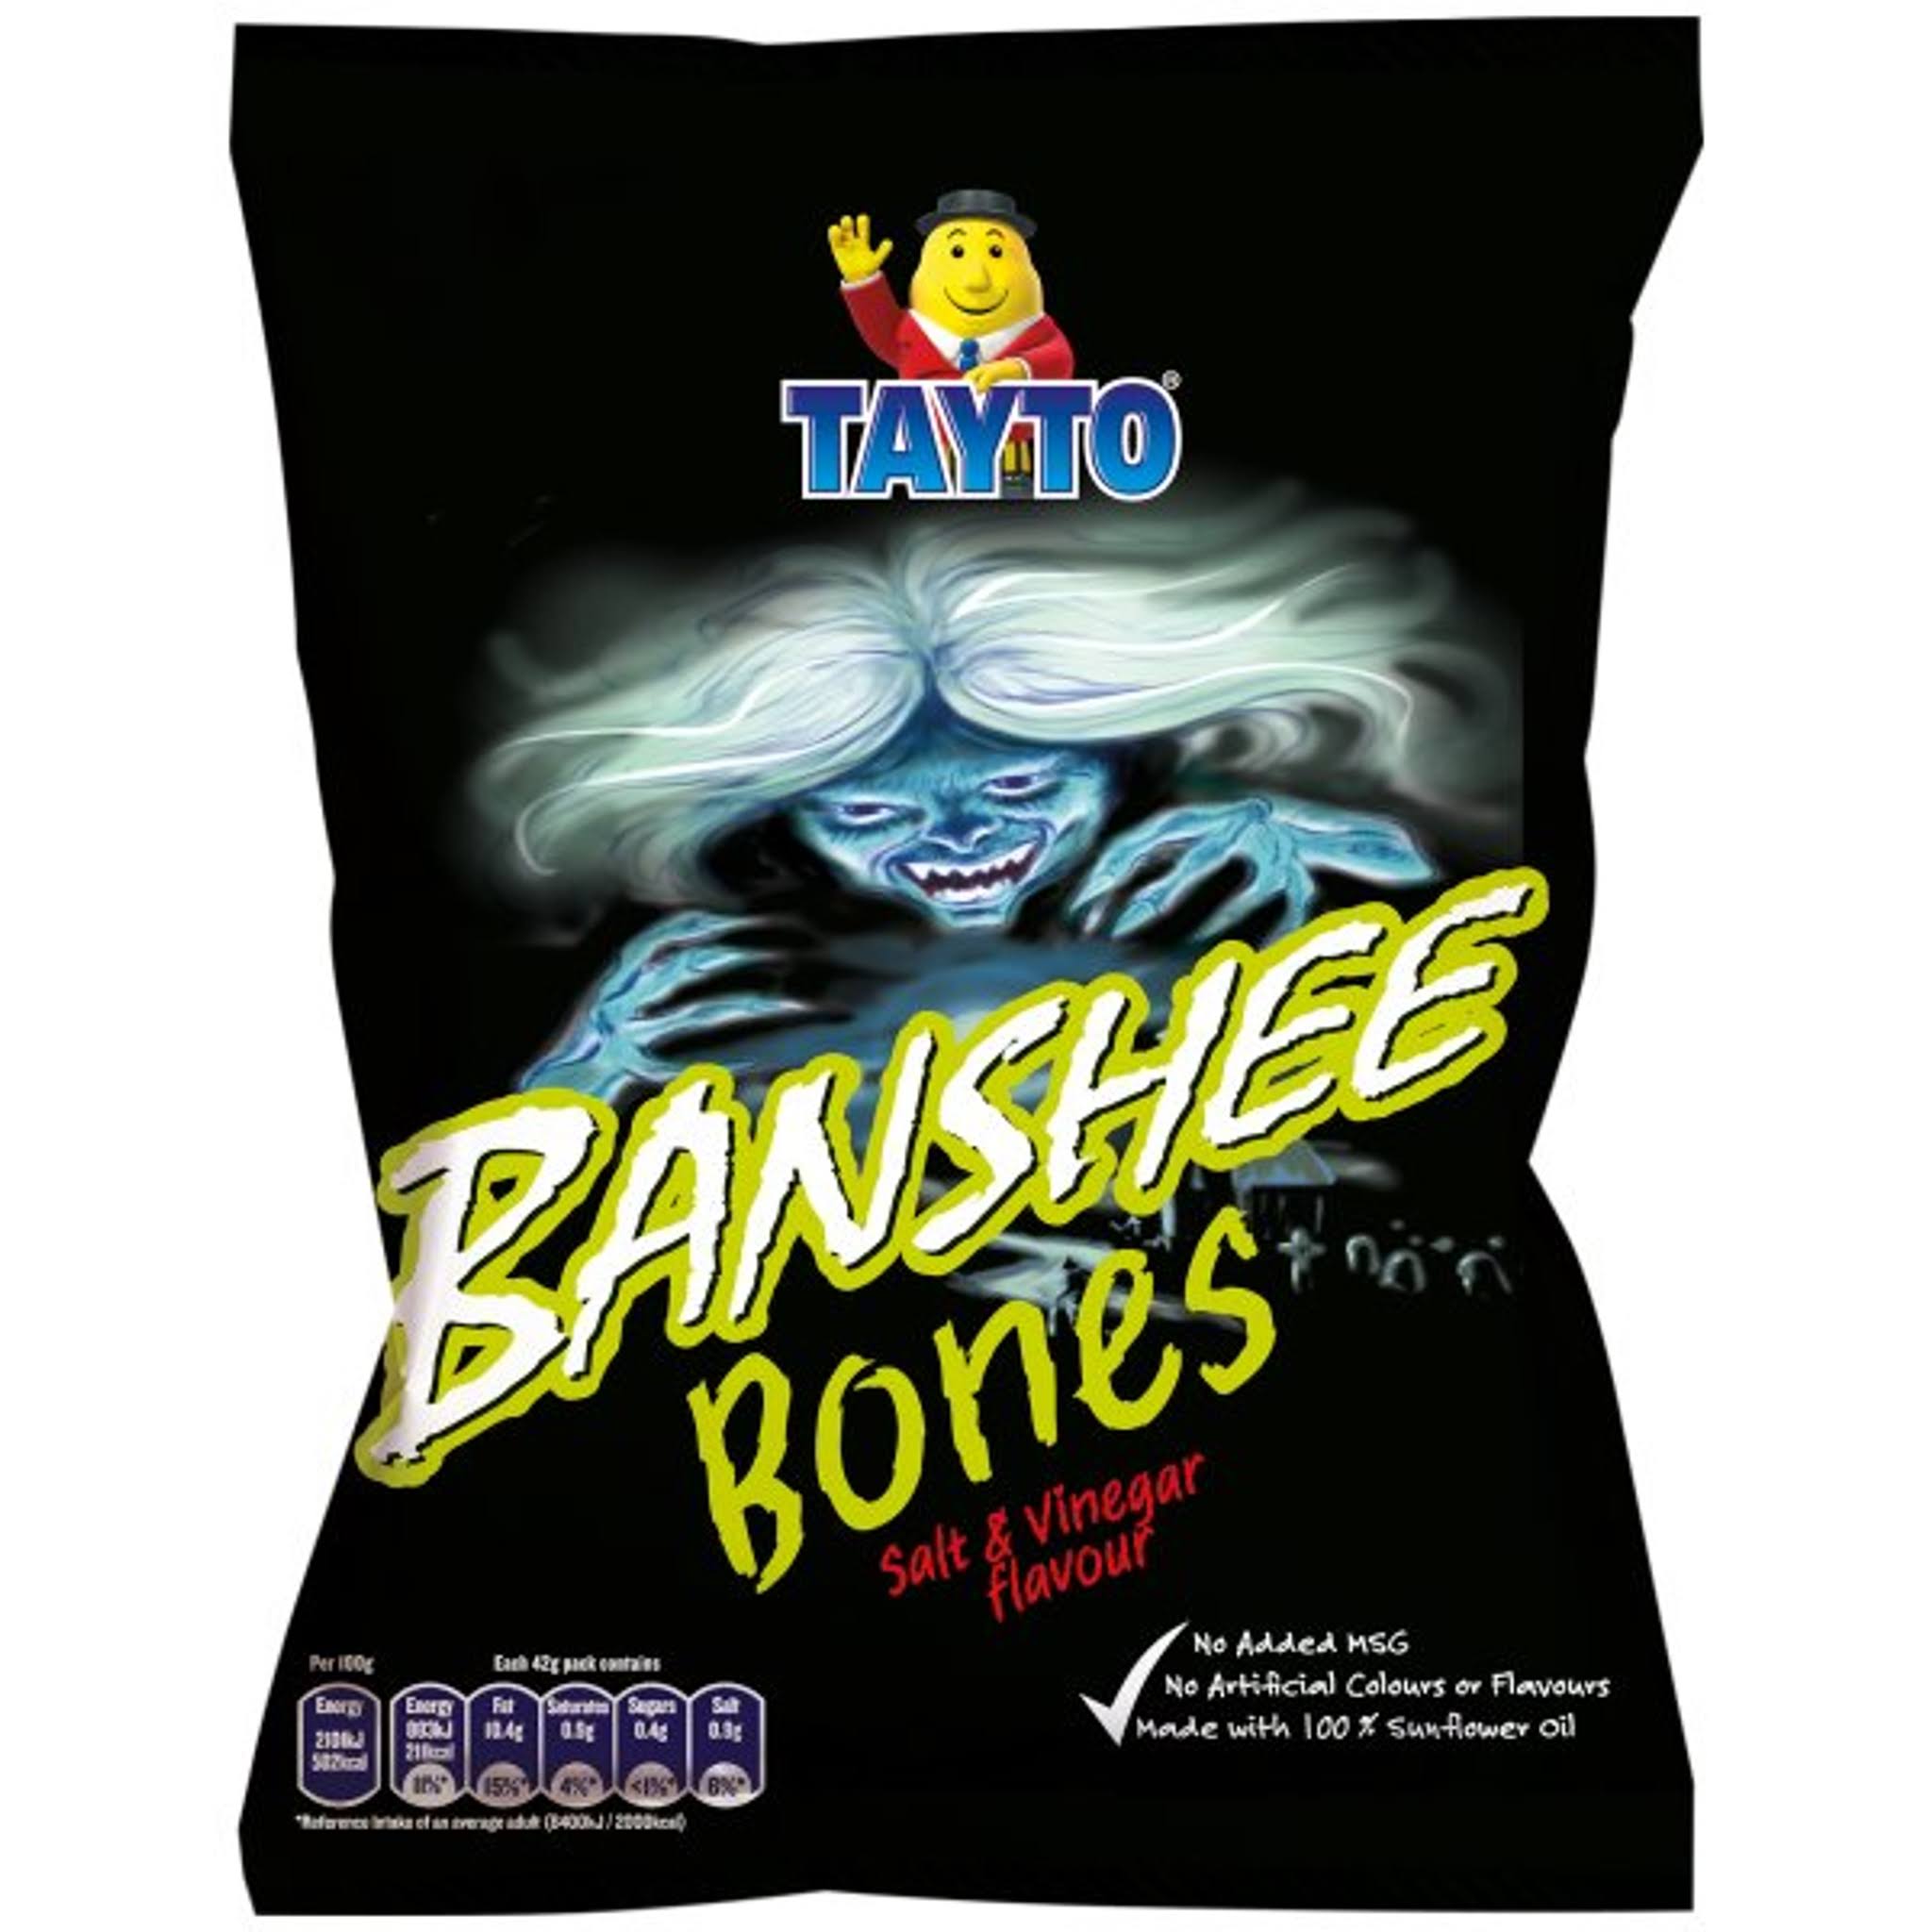 8 Bags of Banshee Bones 42g Each / Total: 336g They're Coming Back!